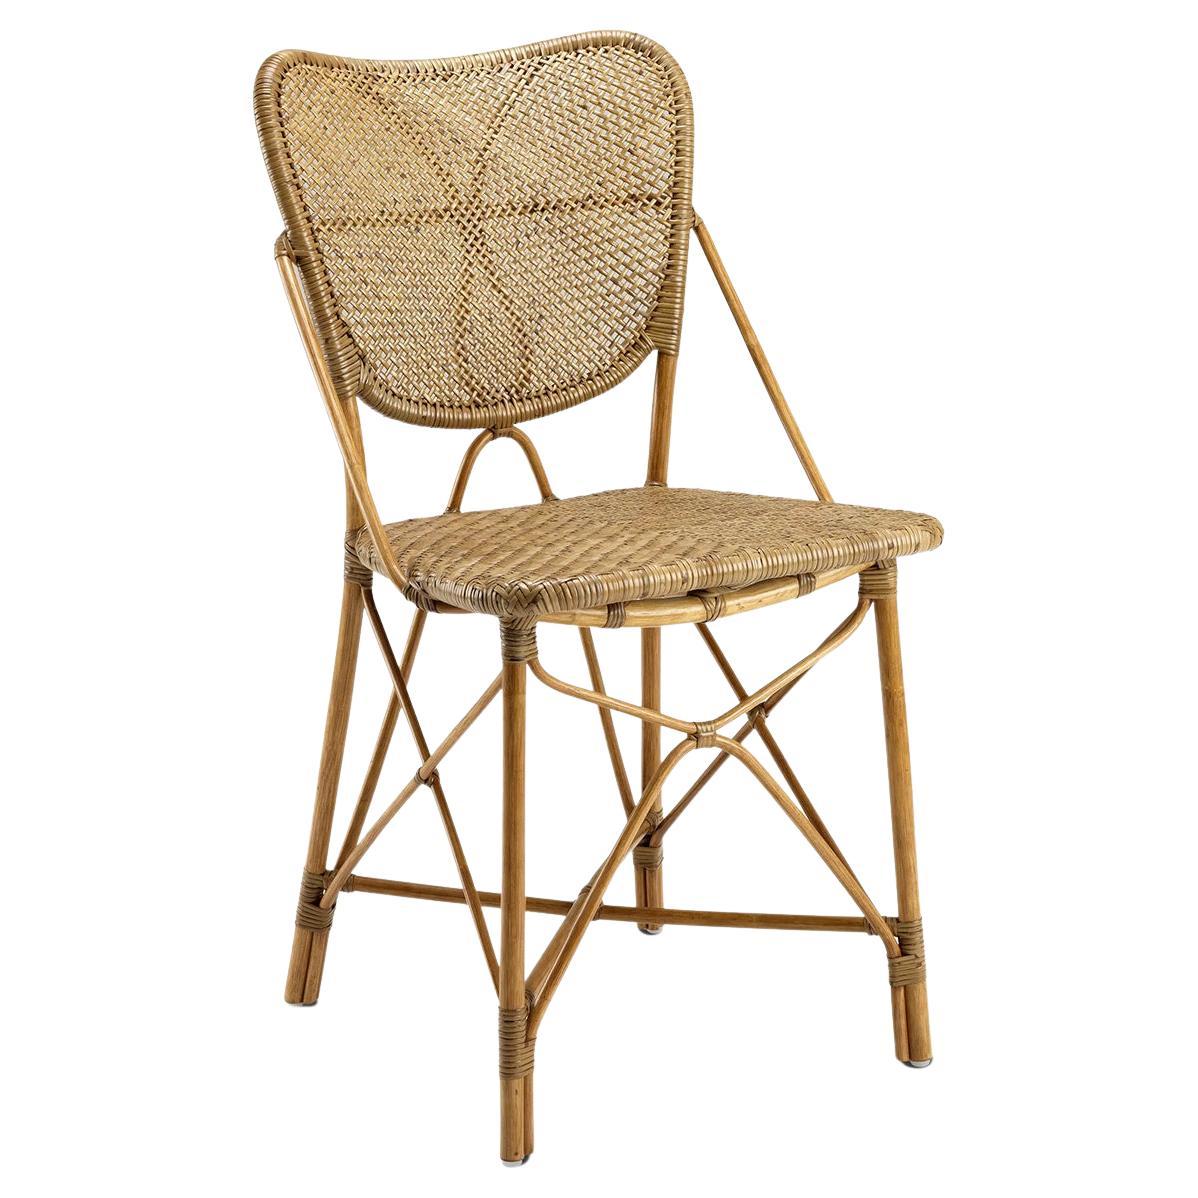 Rattan Style Chair For Sale